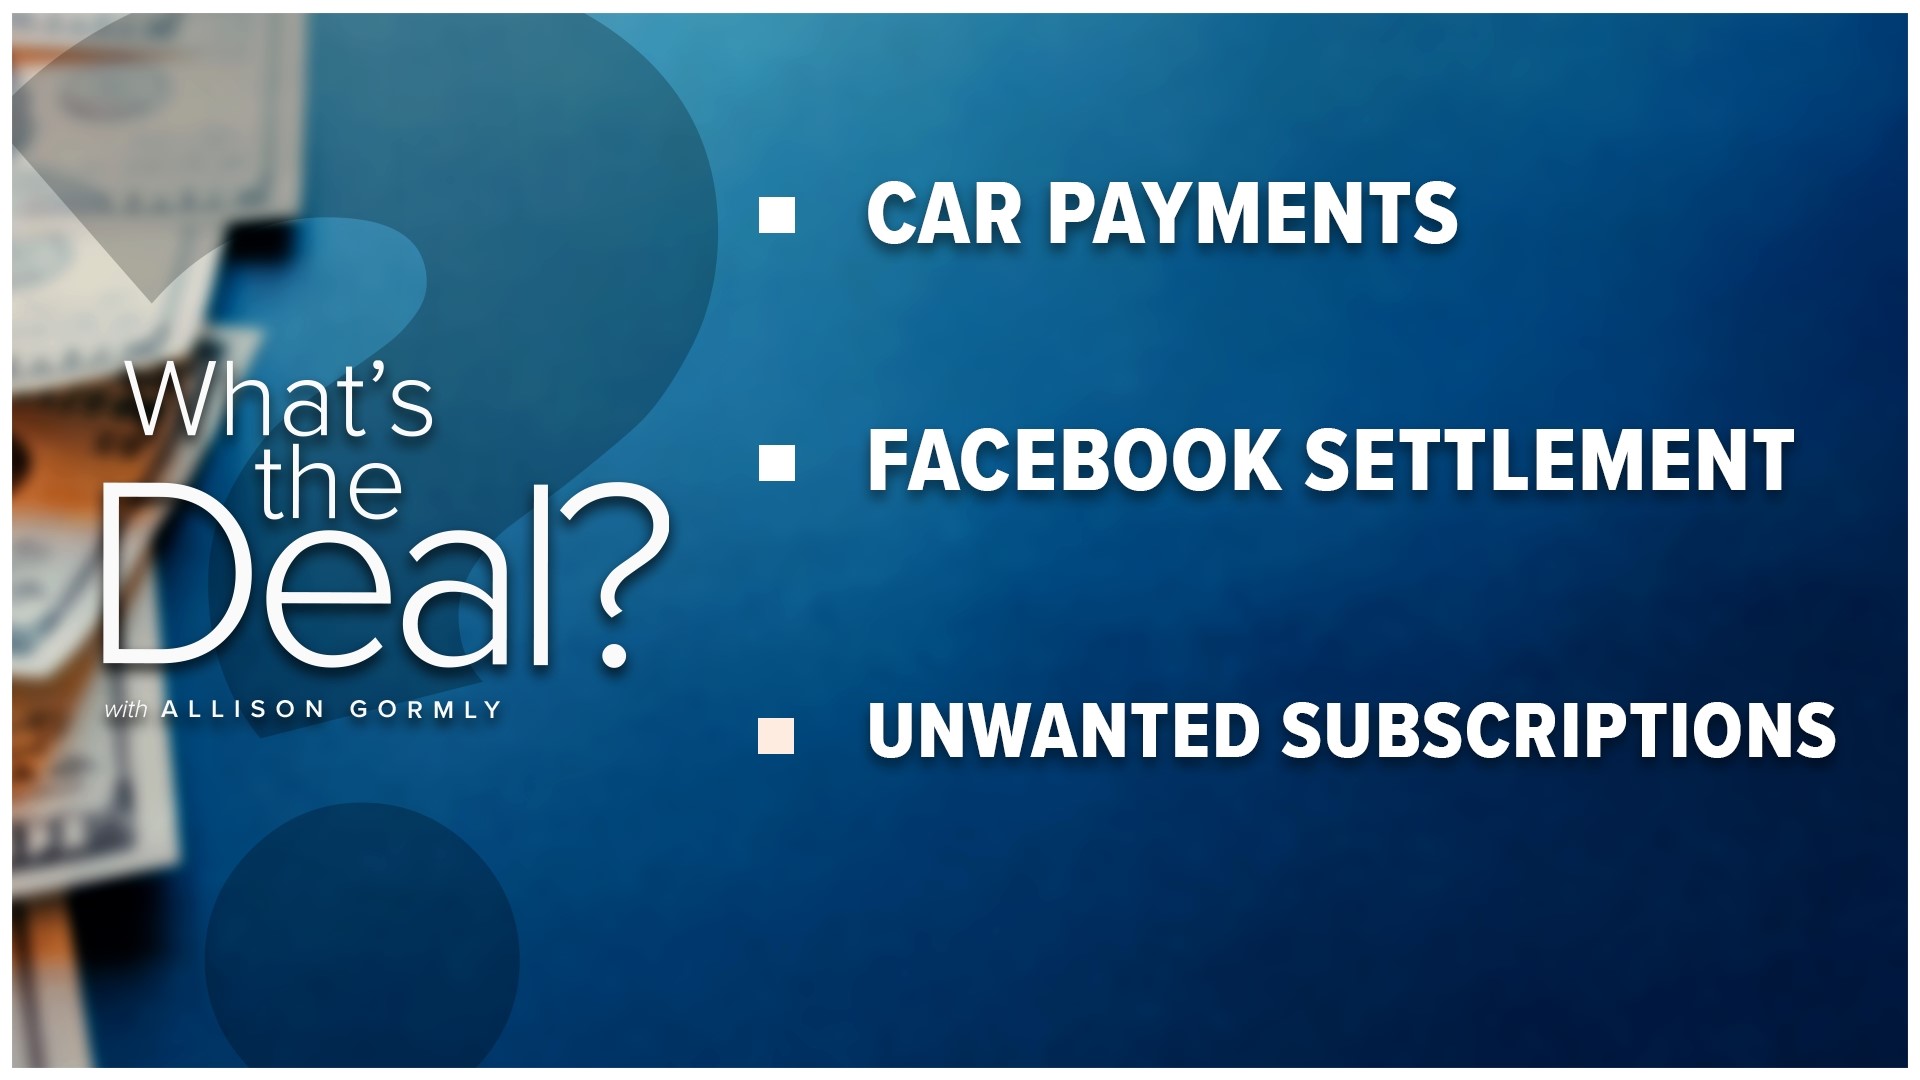 What's the deal with record car payments, how you can file a claim in the Facebook class action lawsuit, and an easy way to cancel unwanted subscriptions.